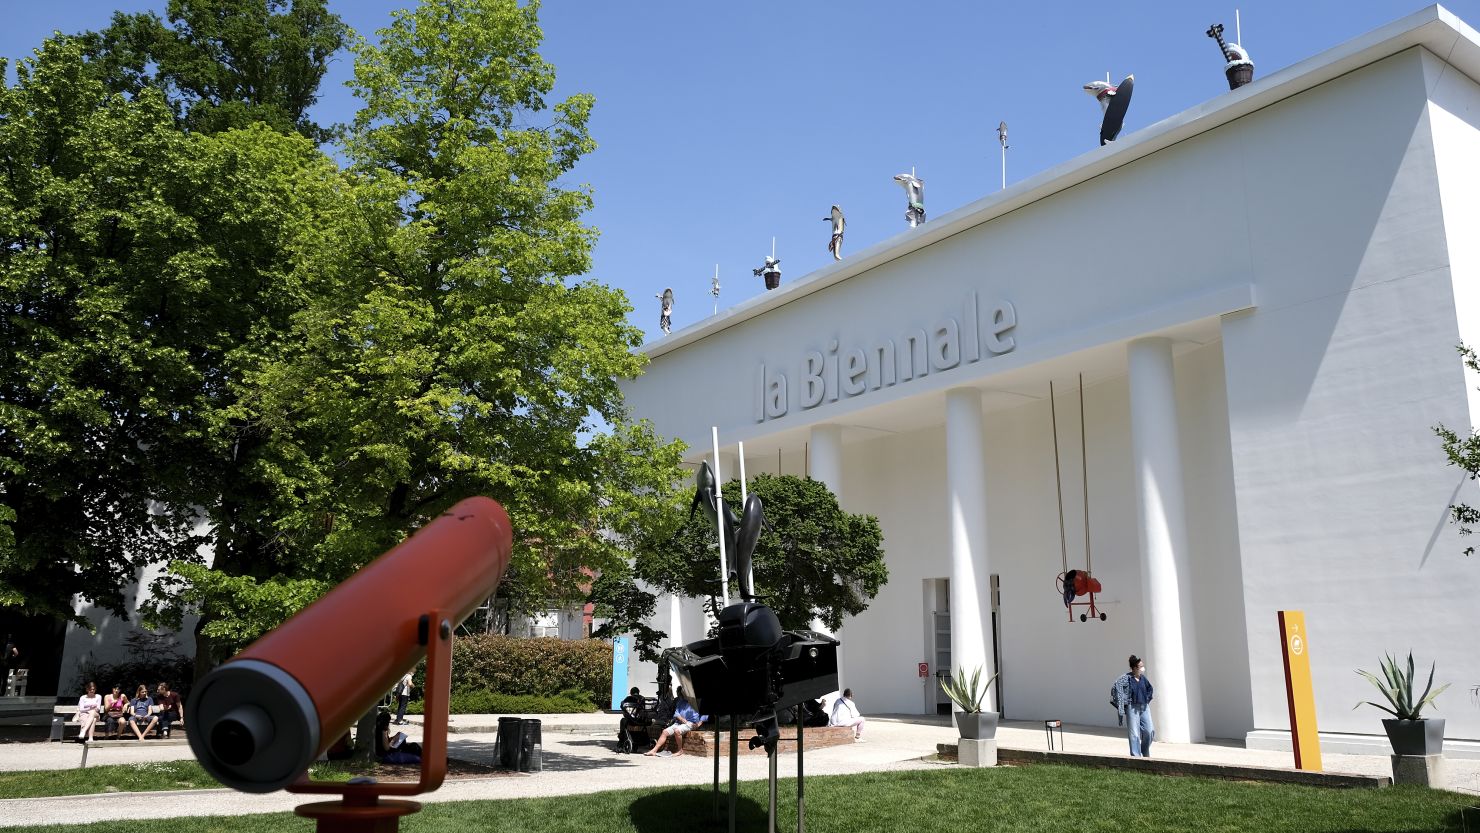 VENICE, ITALY - MAY 12: A view shows the entrance to the "Giardini", one of the venues of the Biennale during the 59th International Art Exhibition (Biennale Arte) on May 12, 2022 in Venice, Italy. (Photo by Giuseppe Cottini/Getty Images)